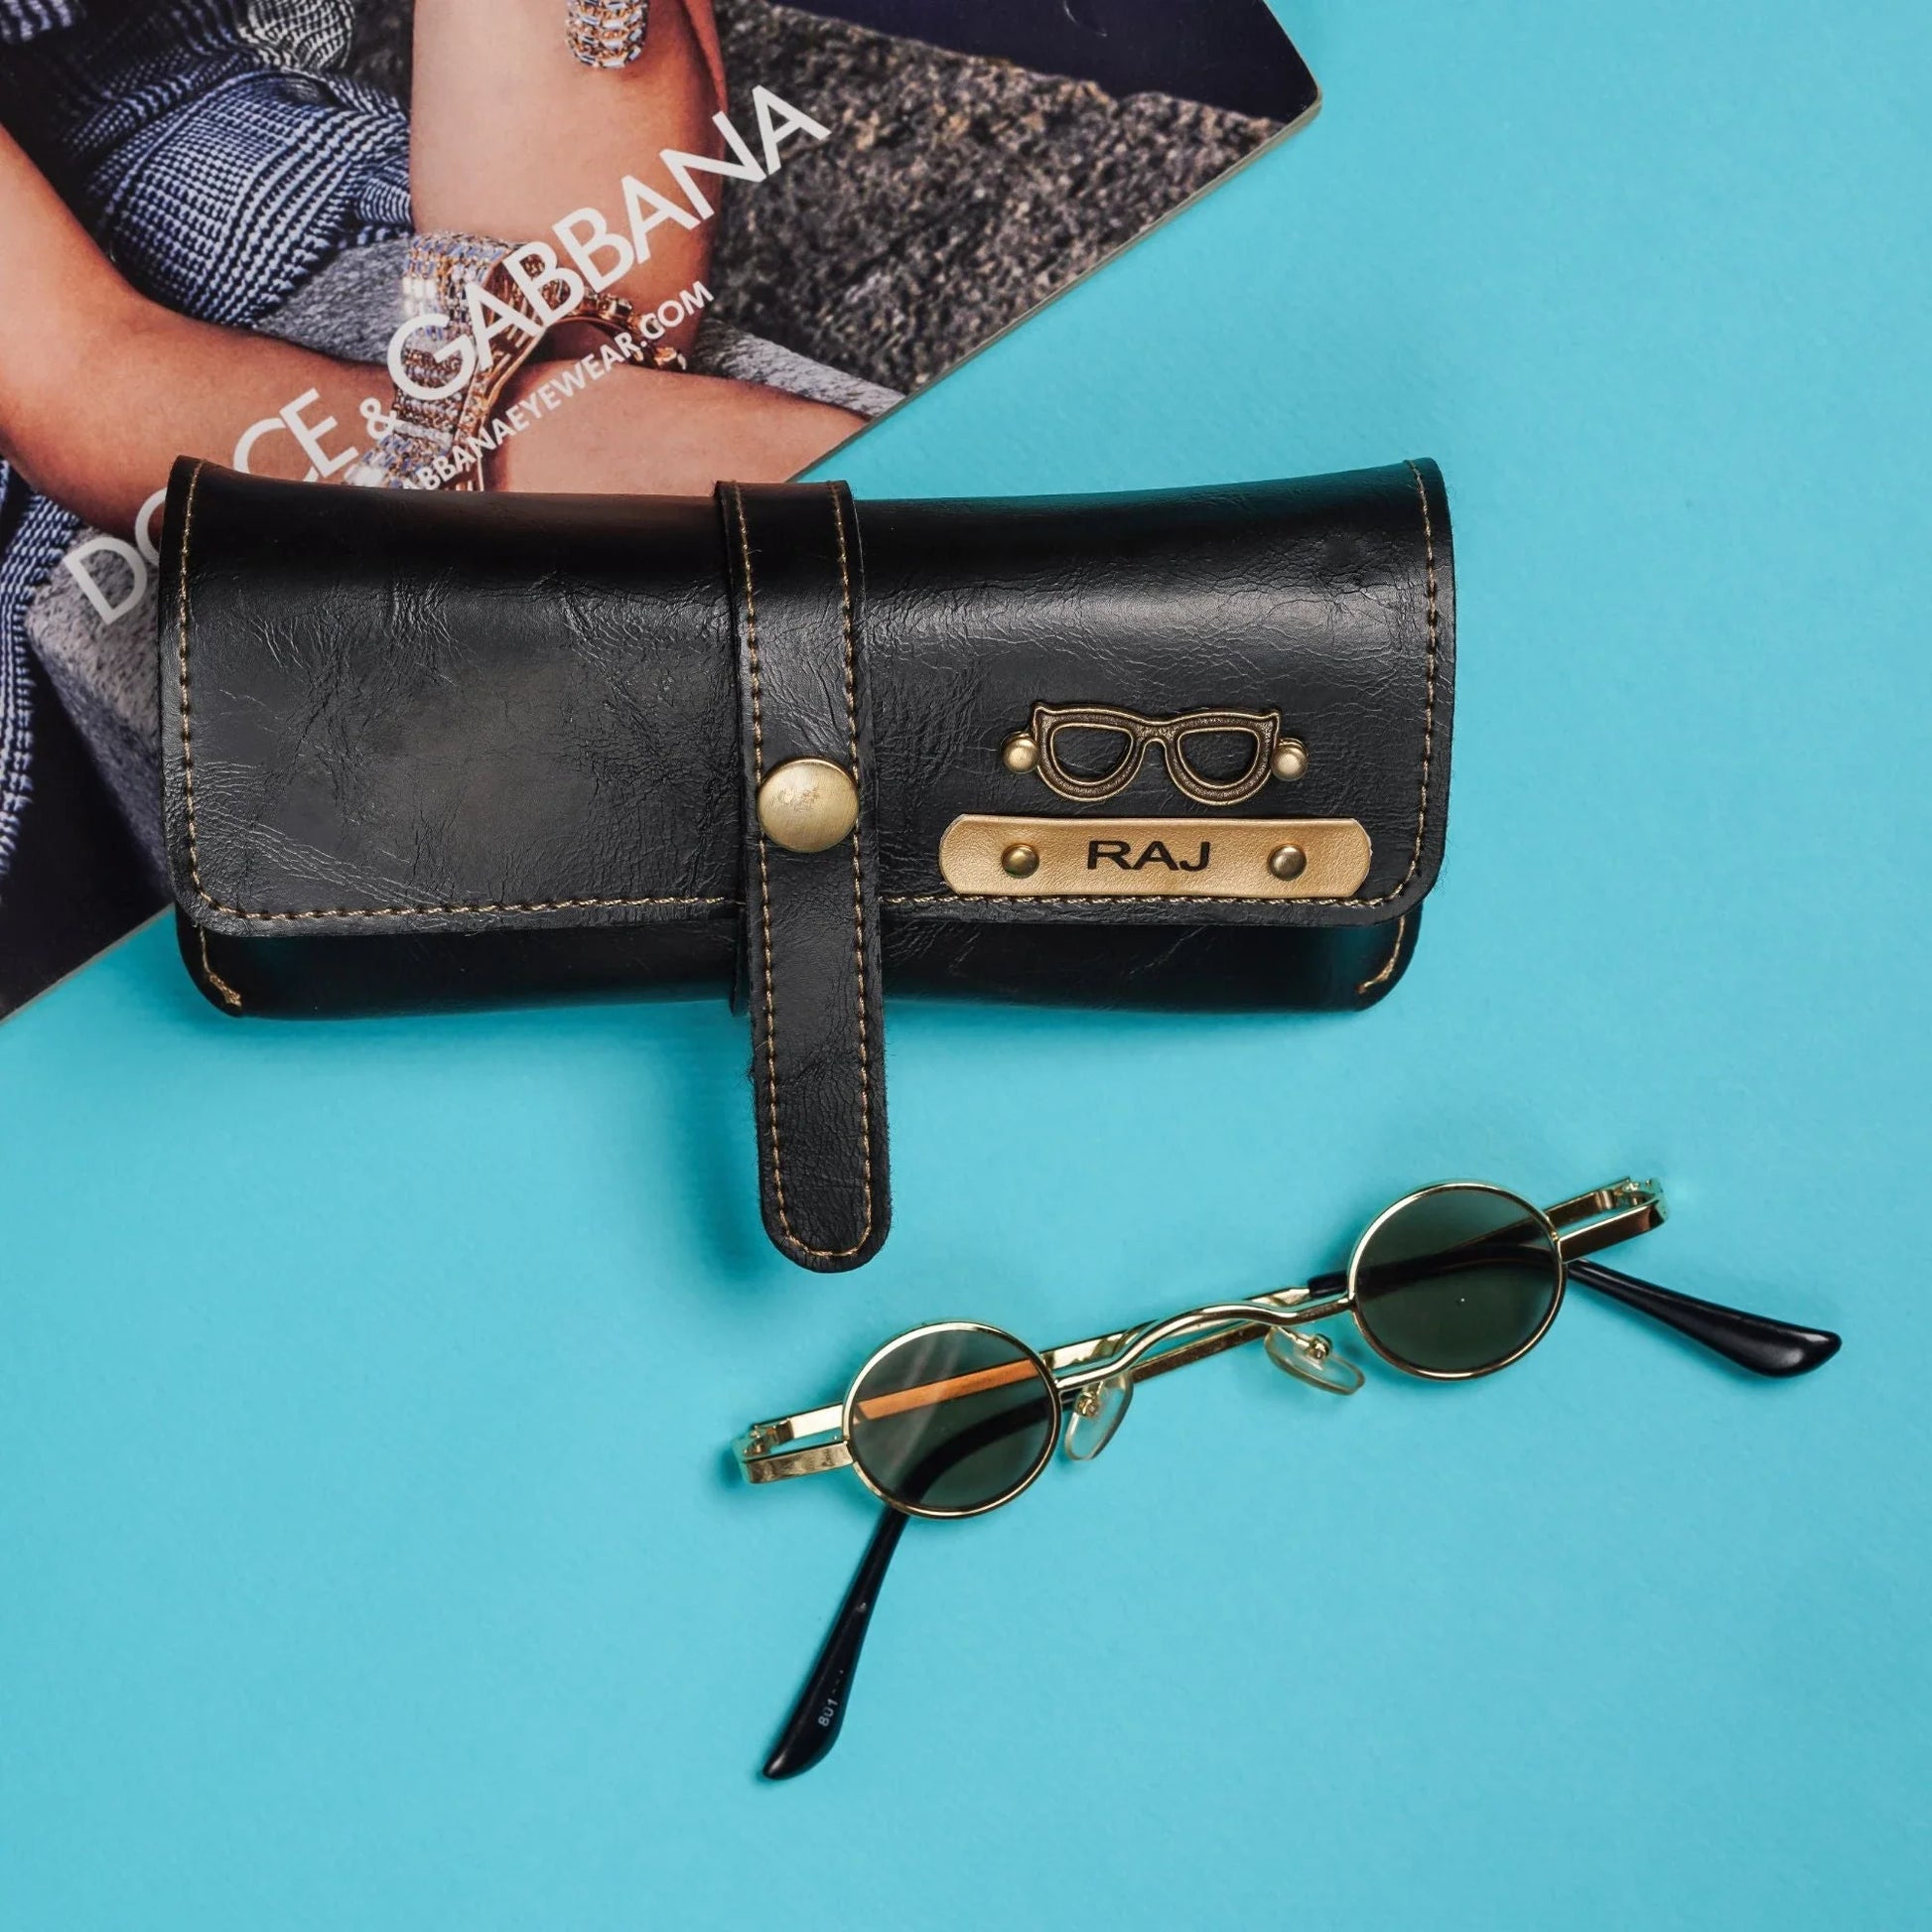 Elevate your everyday carry with our custom sunglasses case! This case is made from high-quality materials and features a sleek, modern design, making it the perfect choice for anyone looking for a stylish and practical accessory.